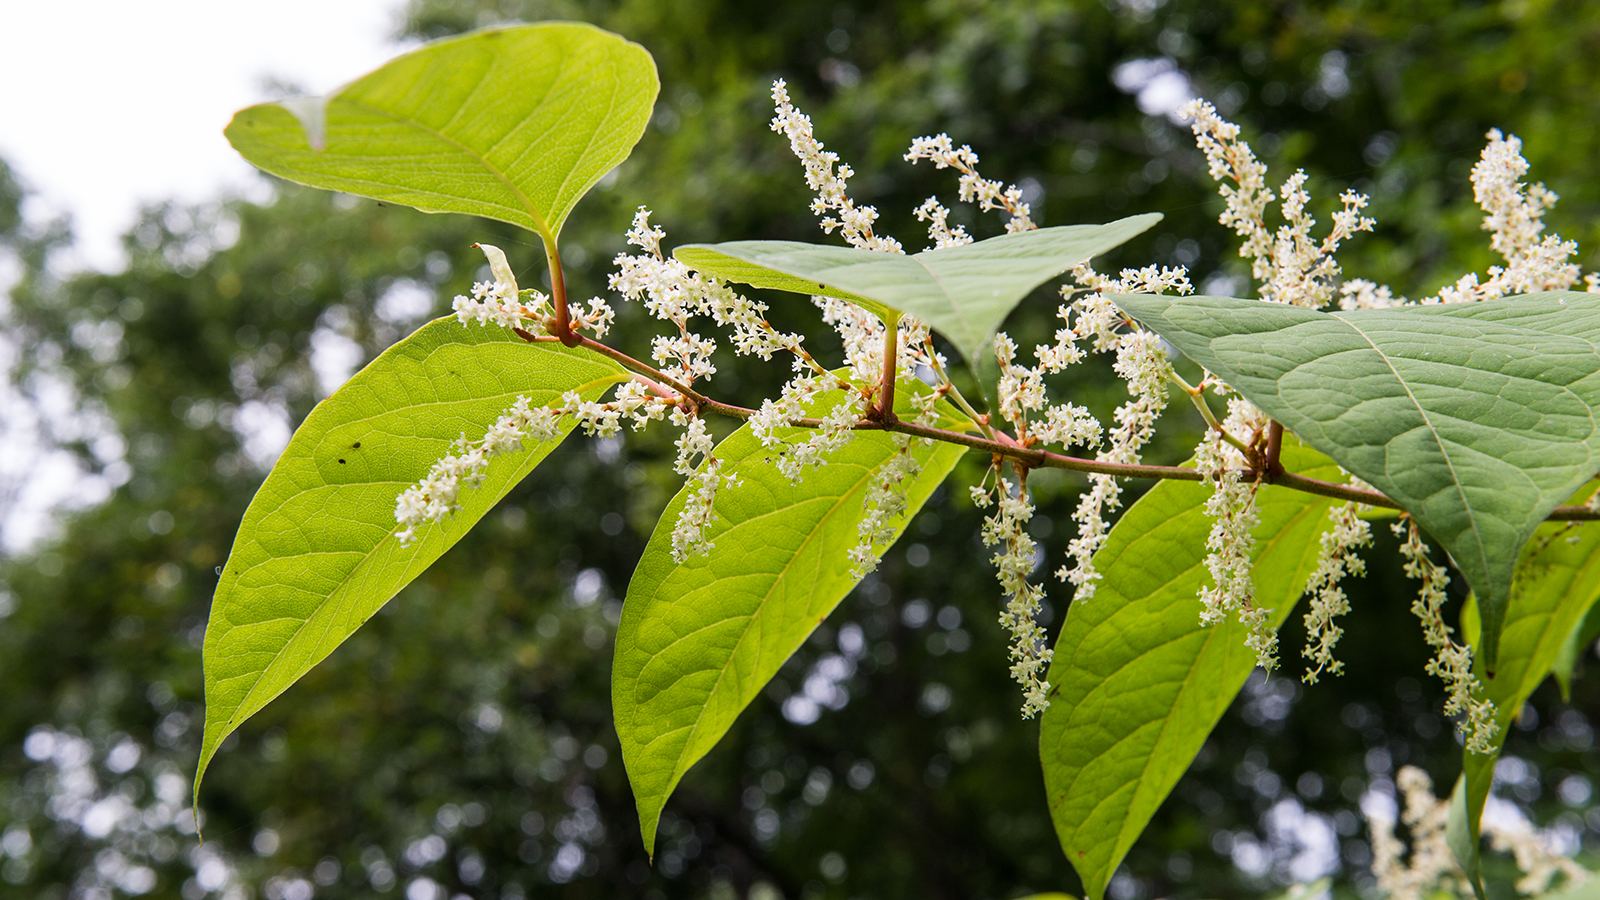 Japanese knotweed, with reddish stems, green oval-shaped leaves with pointed tips and small white flowers.